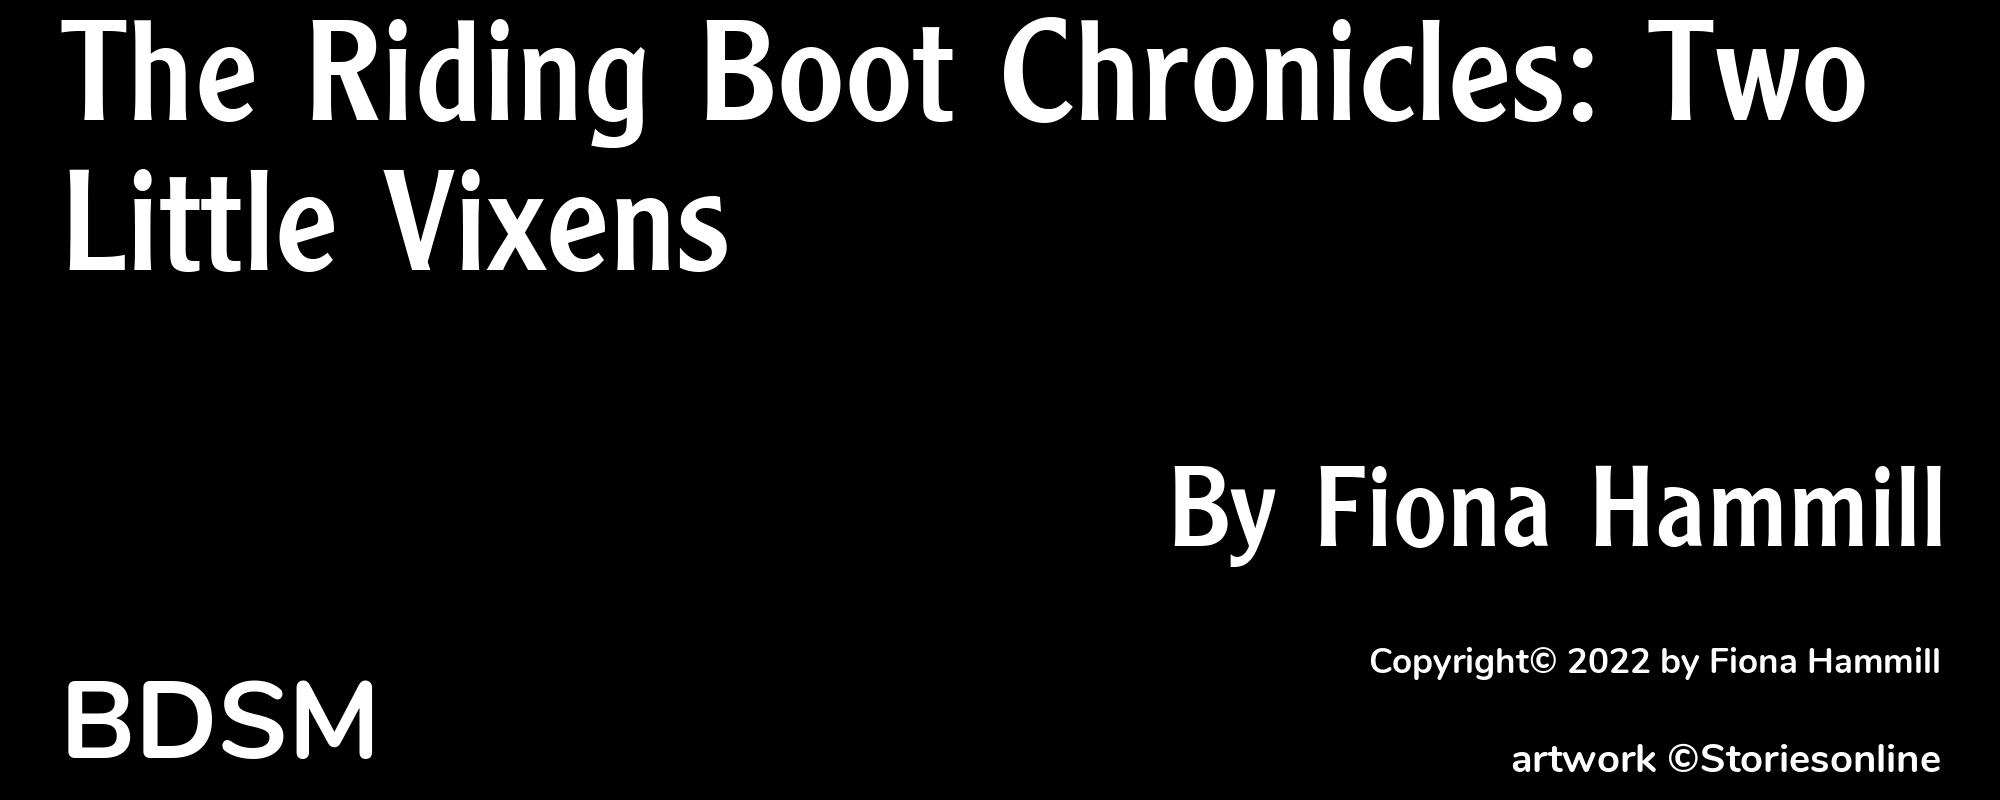 The Riding Boot Chronicles: Two Little Vixens - Cover